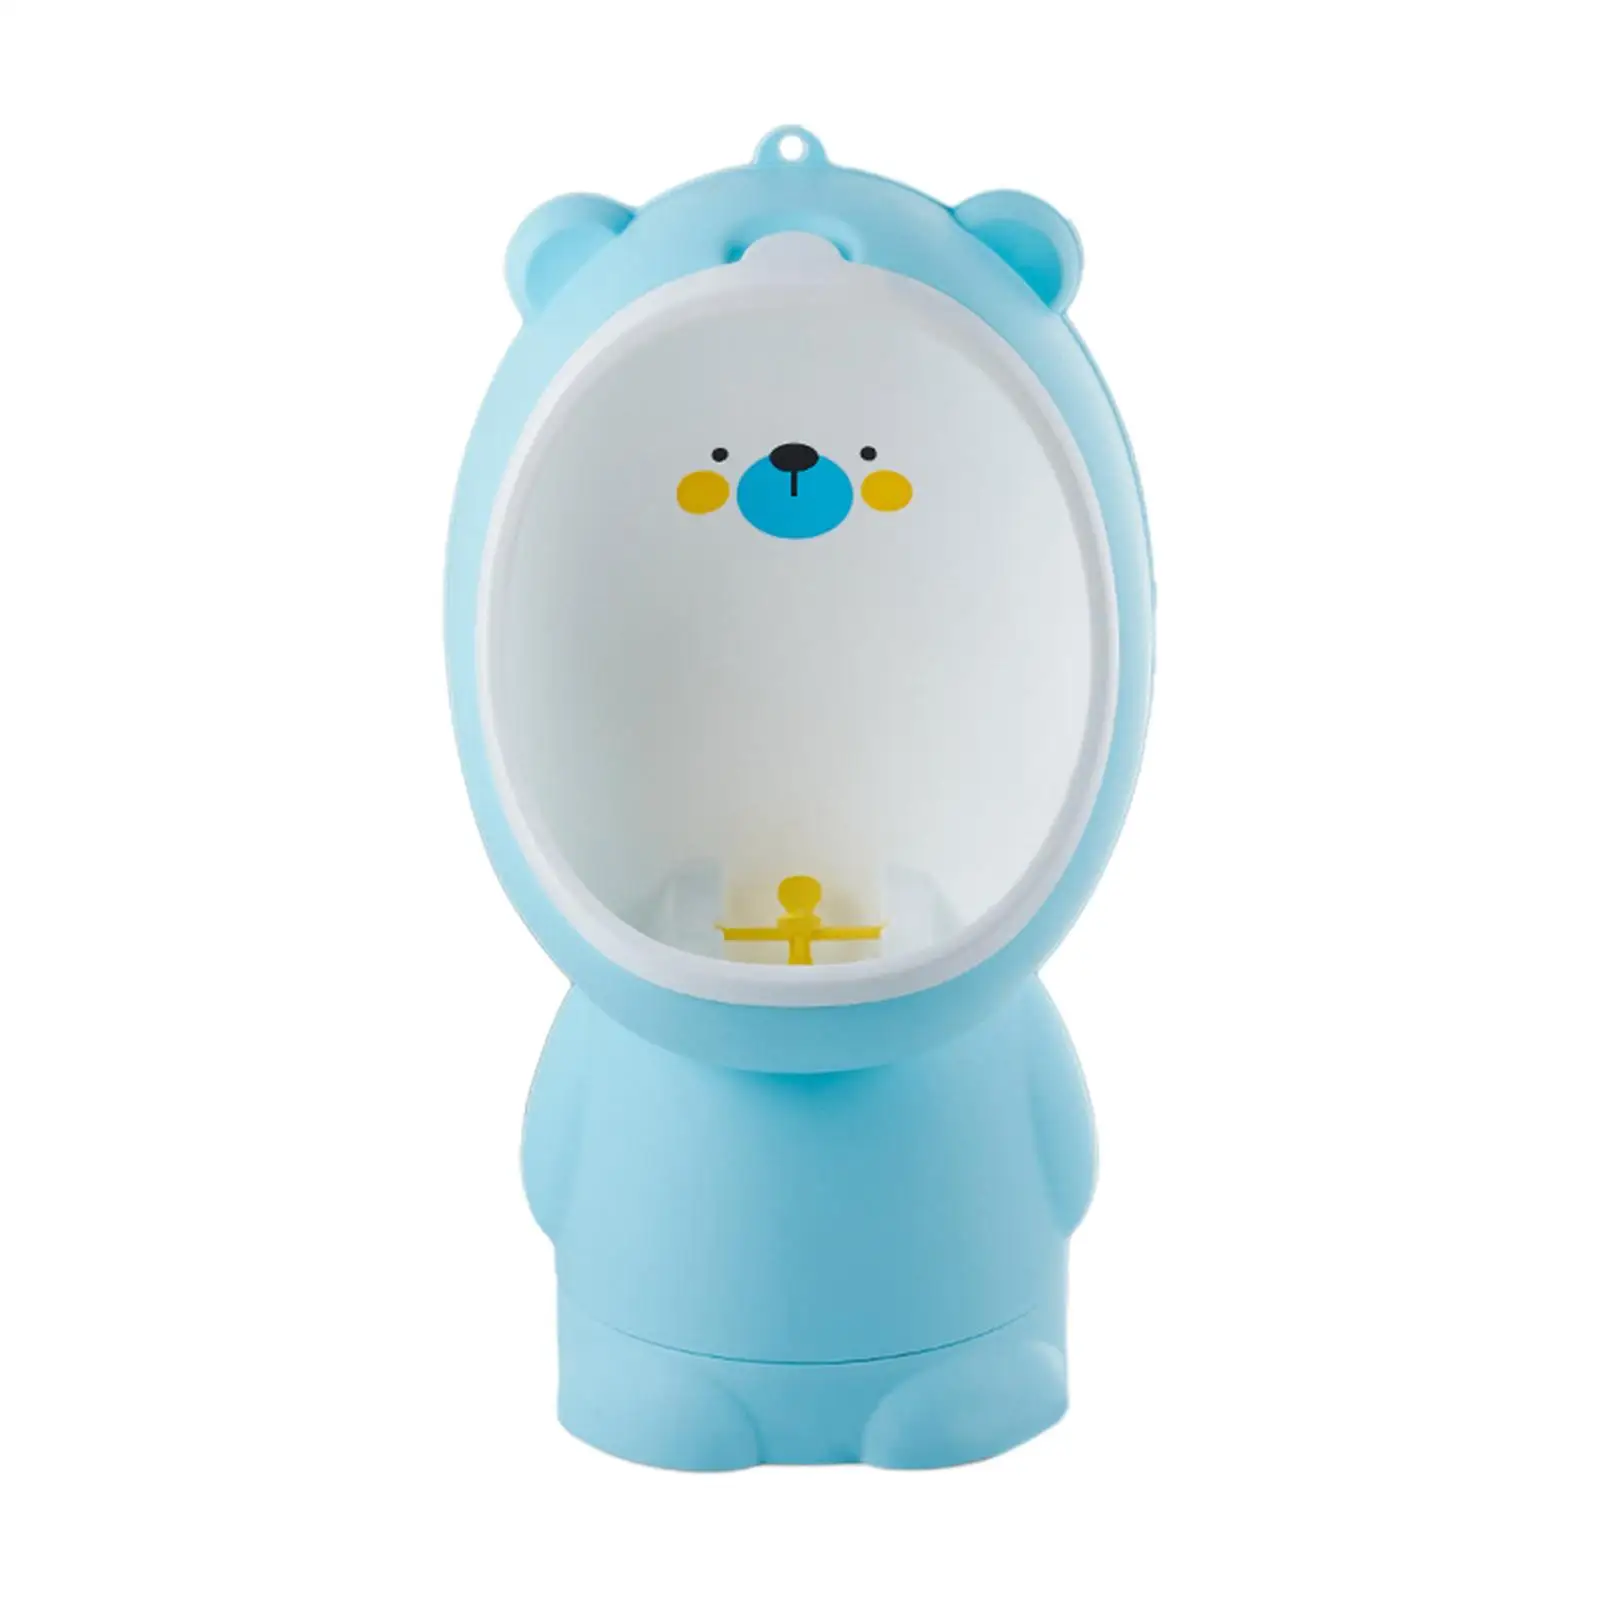 Cute Bear Potty Trainer Urinal Urinal Pee Trainer Standing Potty Urinal Urinals Toilet Training for Baby Boys Child Toddlers